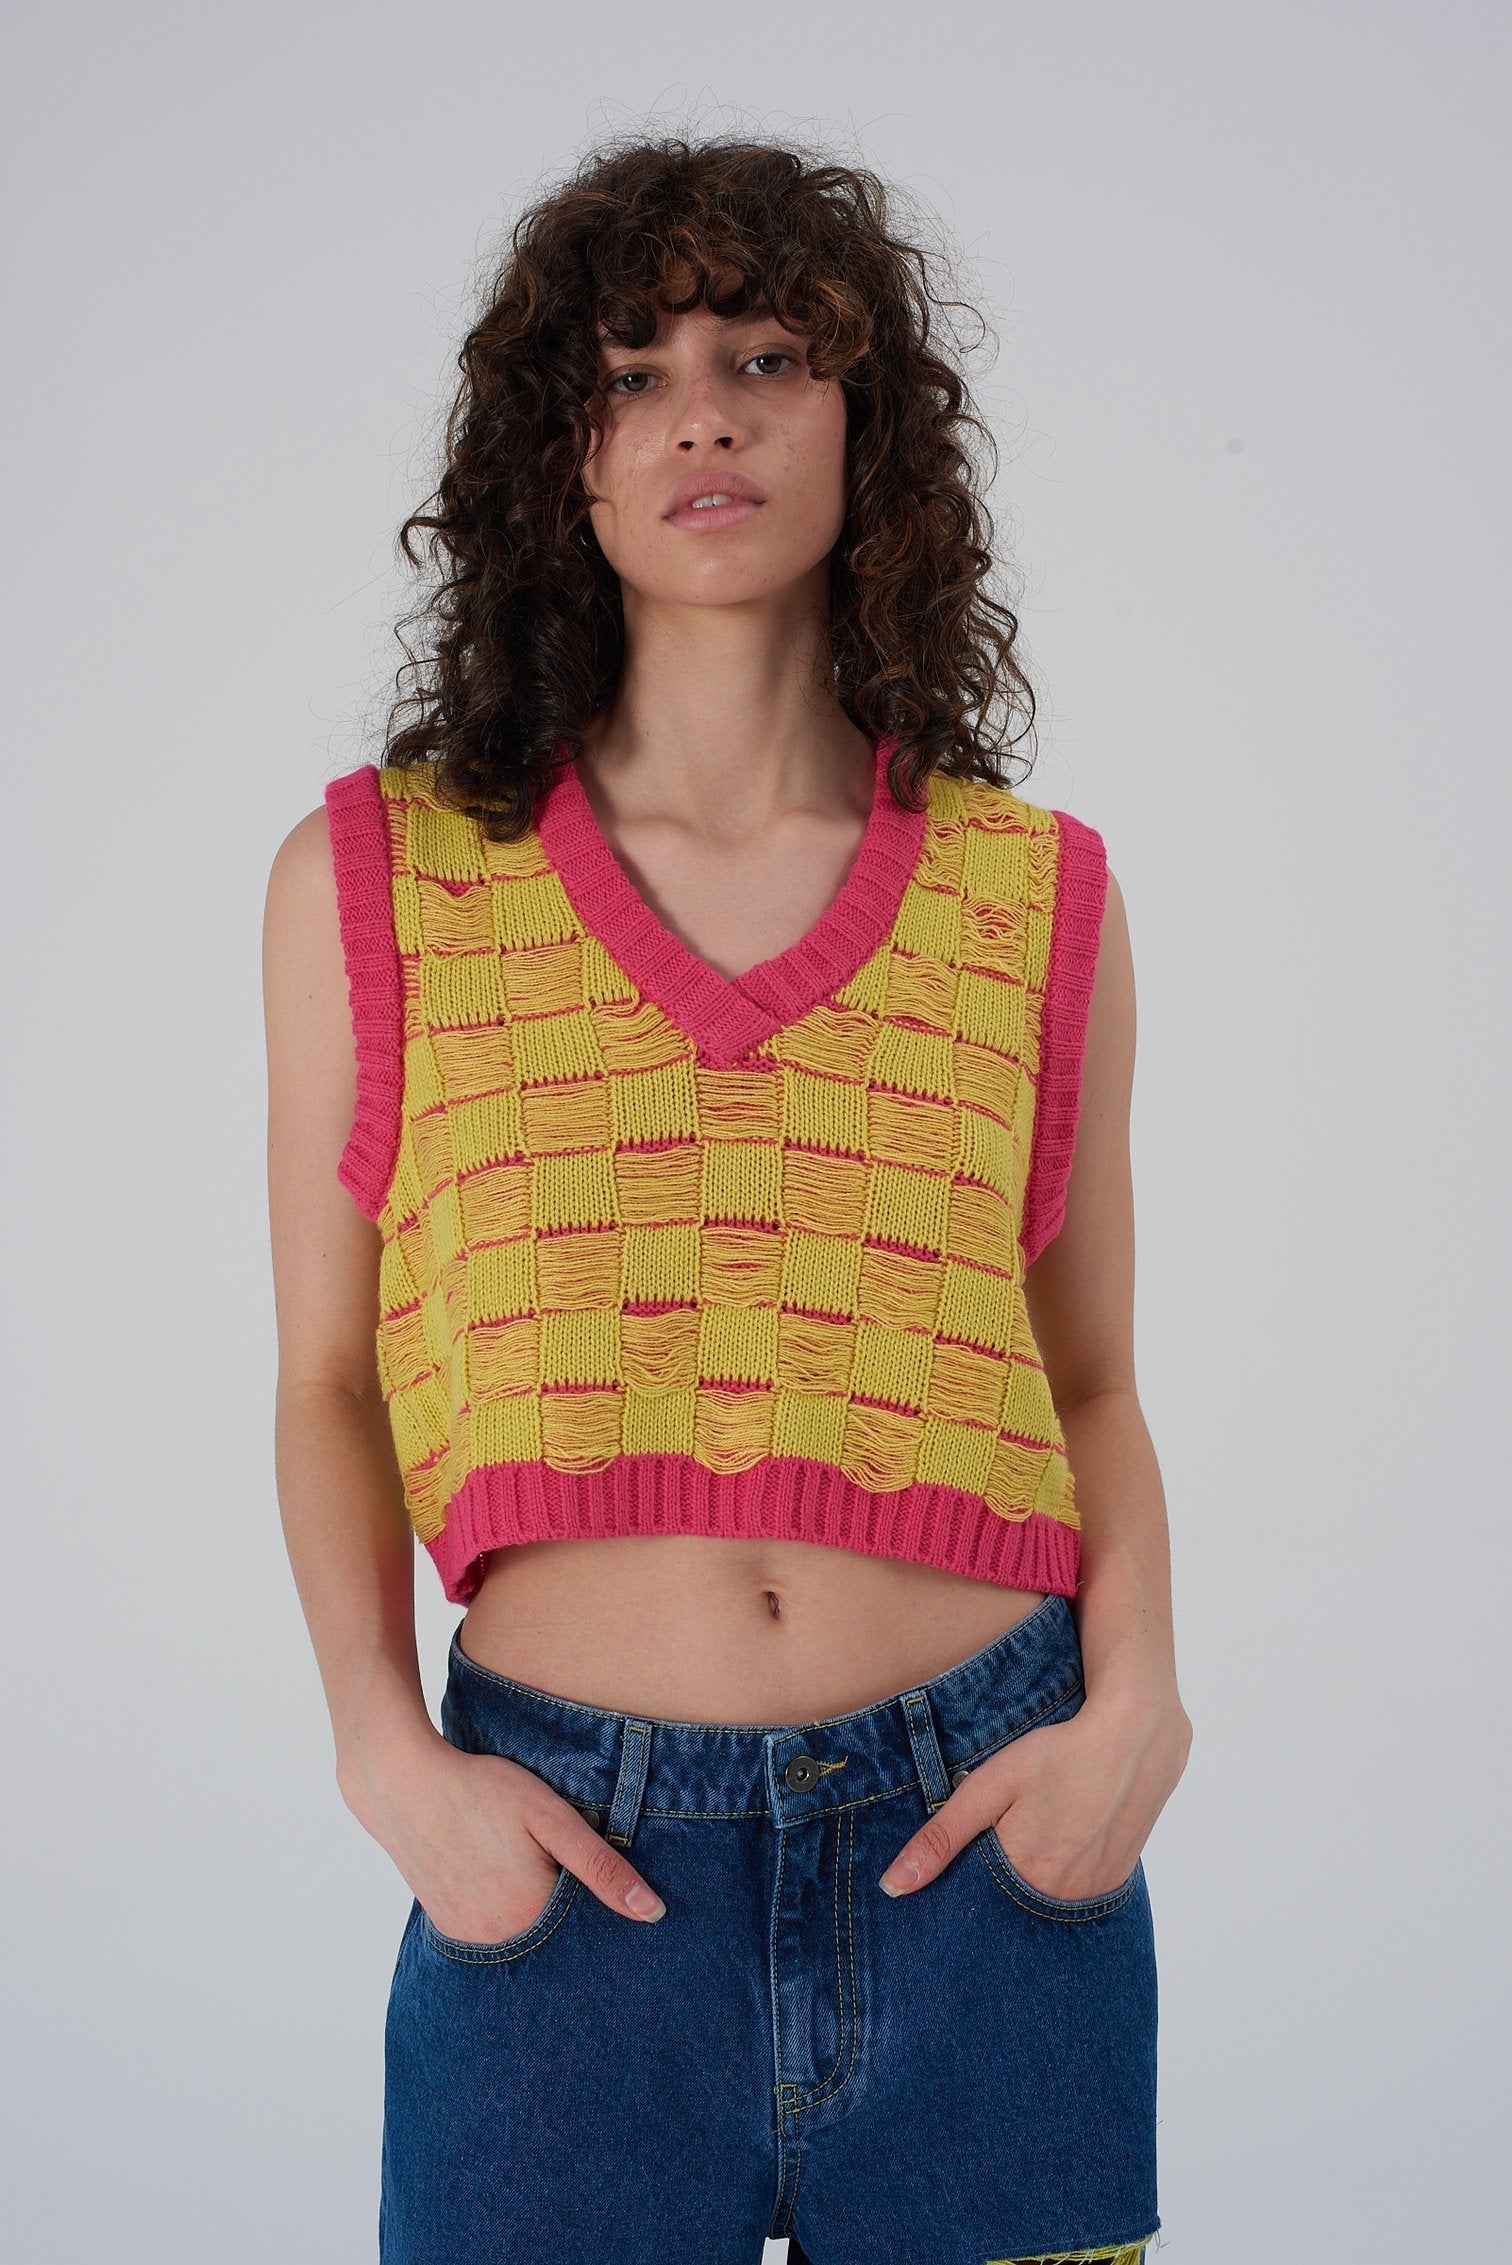 BLEACHER VEST - EXCLUSIVE Knitwear from THE RAGGED PRIEST - Just €39! SHOP NOW AT IAMINHATELOVE BOTH IN STORE FOR CYPRUS AND ONLINE WORLDWIDE @ IAMINHATELOVE.COM